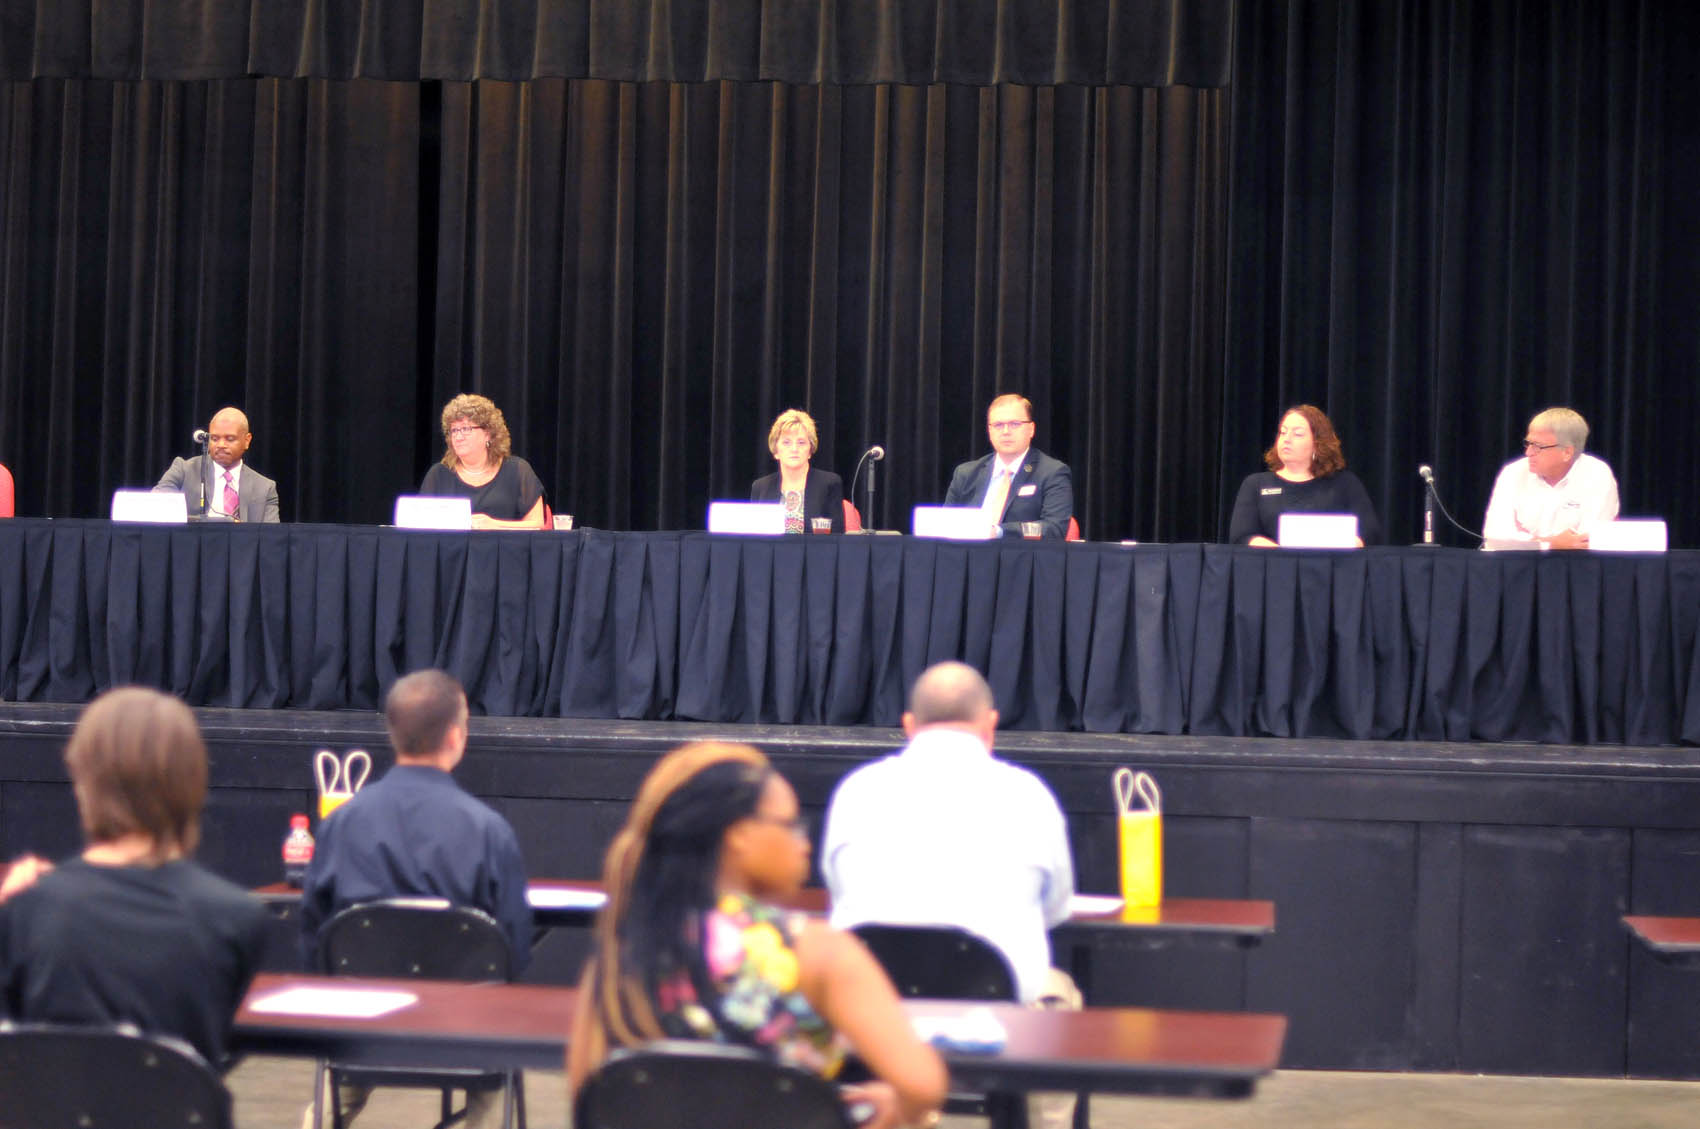 Click to enlarge,  Participants in a FutureWork Prosperity Tour 2016 panel discussion on Wednesday, June 22, included (left to right) Donnie Charleston, Economy Policy Manager, Institute for Emerging Issues; Amy Dalrymple, Chair, Lee County Board of Commissioners; Joyce D. McGehee, Human Resources Director, Lee County; Daniel Simmons, Chief Professional Officer, Boys &amp; Girls Club of Sanford/Lee County; Denise Martin, Program Director, CCCC Health Information Technology; and Jerry Pedley, President and Owner, Mertek Solutions Inc. 